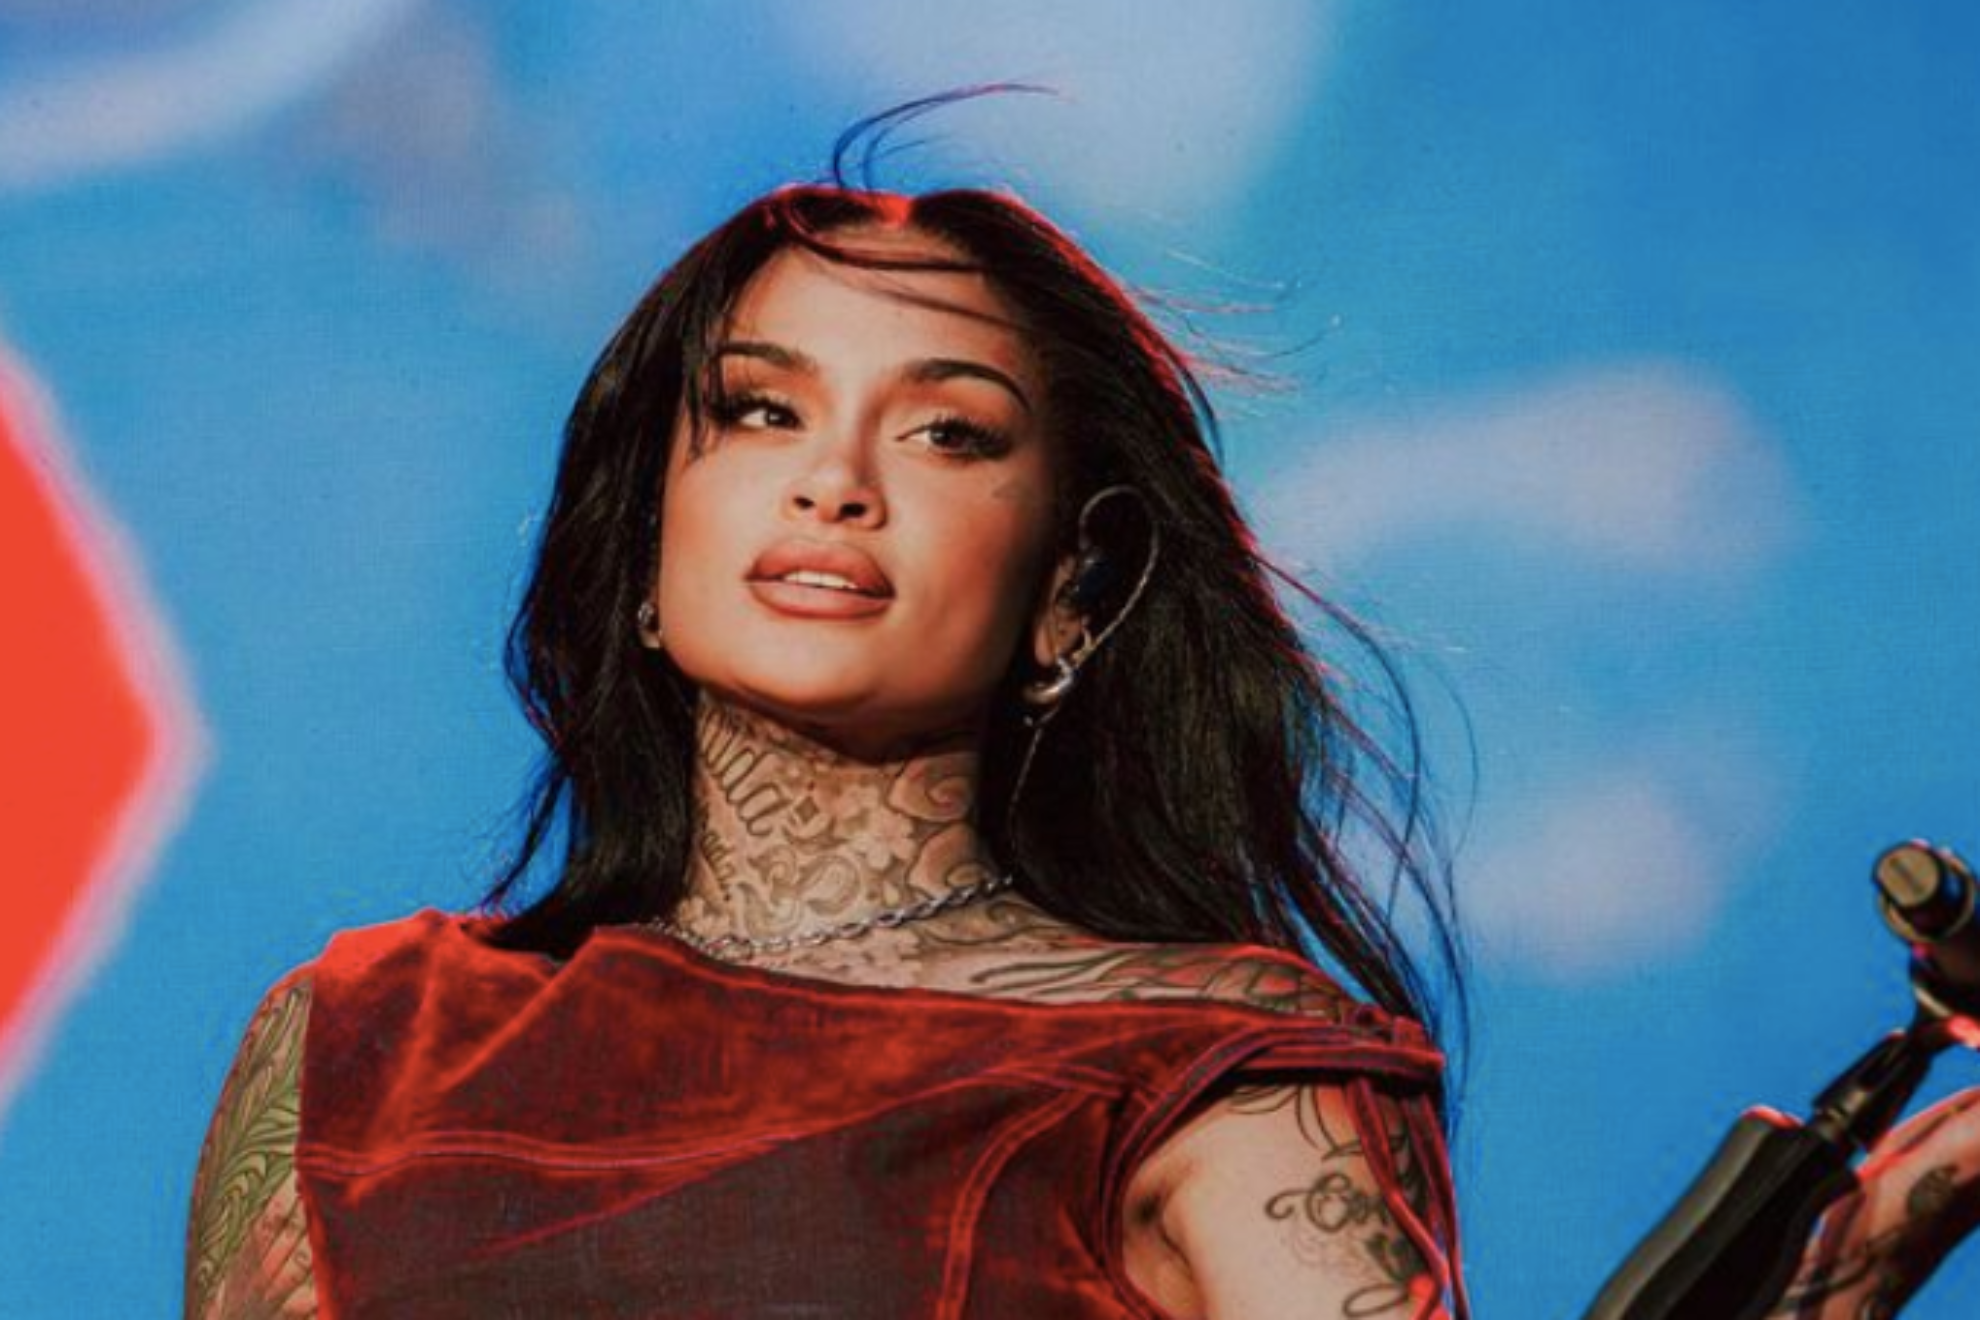 Kyrie Irving's ex-girlfriend Singer Kehlani expresses support for Palestine: What the f*** is wrong with y'all?